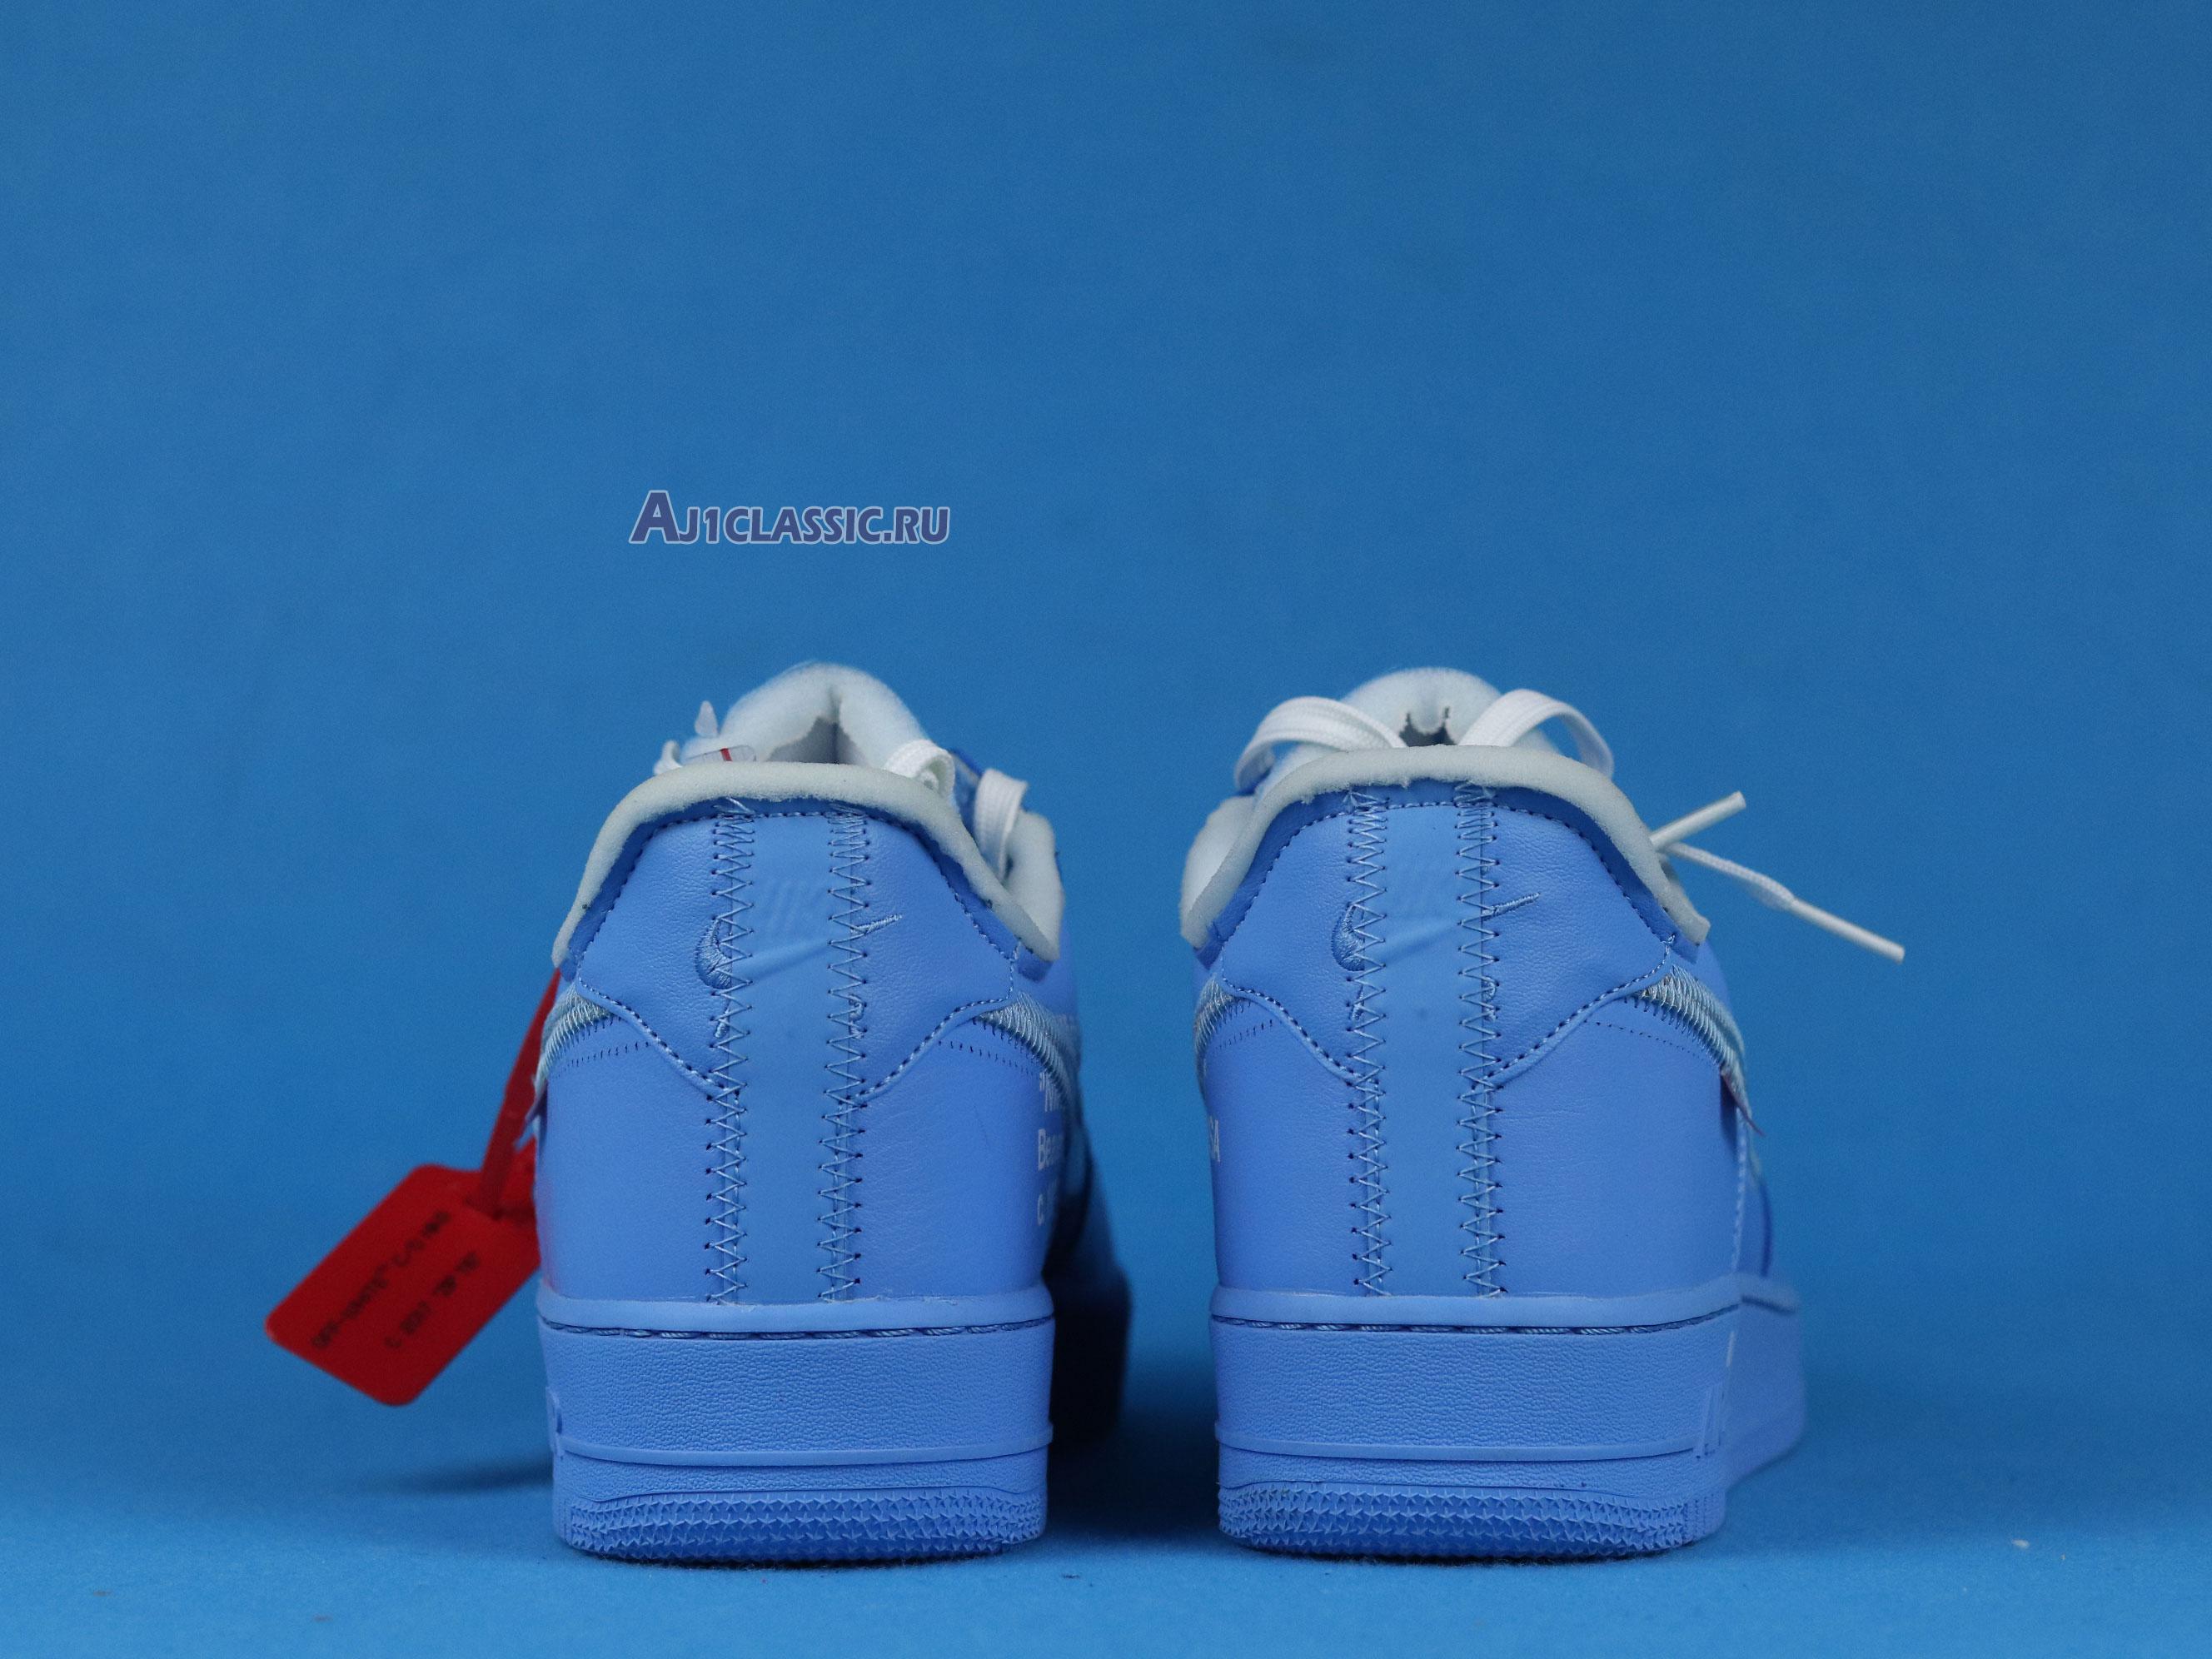 Off-White x Nike Air Force 1 Low 07 "MCA" CI1173-400